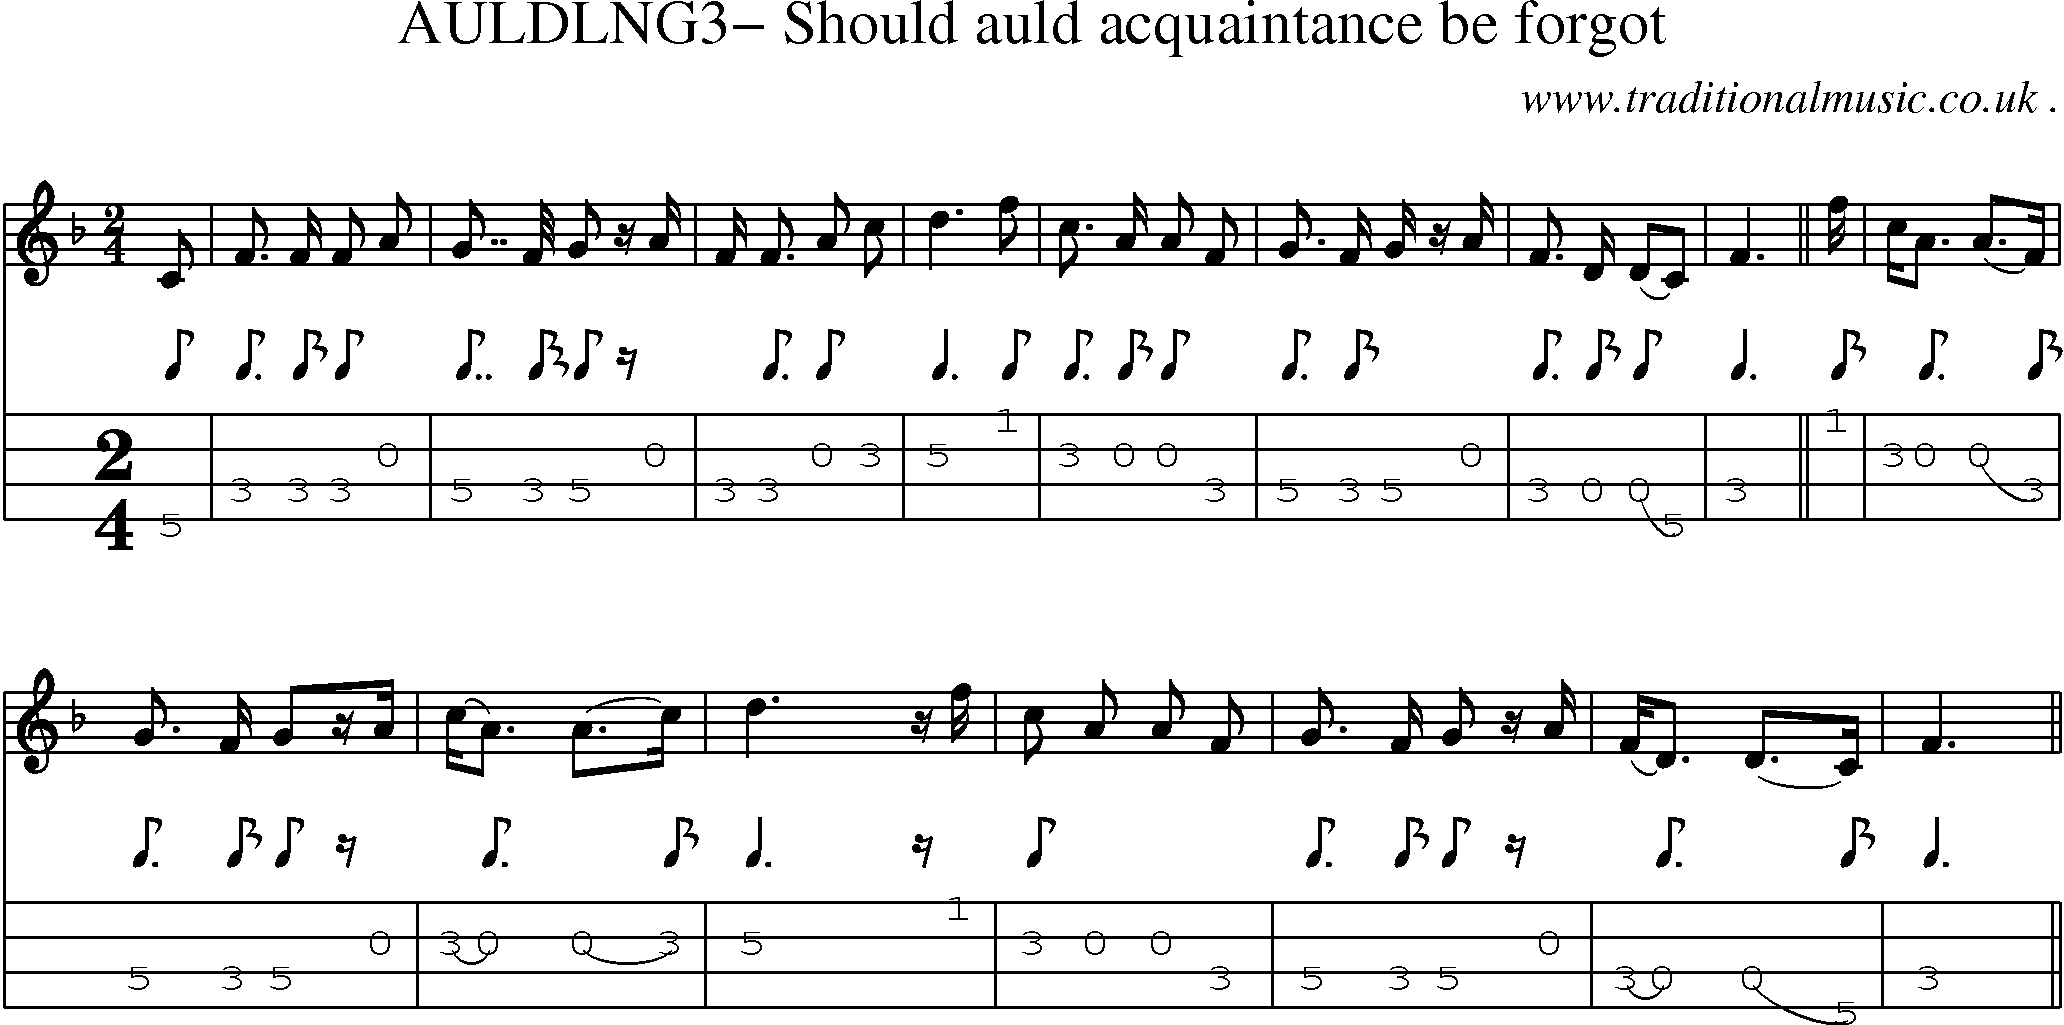 Sheet-Music and Mandolin Tabs for Auldlng3 Should Auld Acquaintance Be Forgot